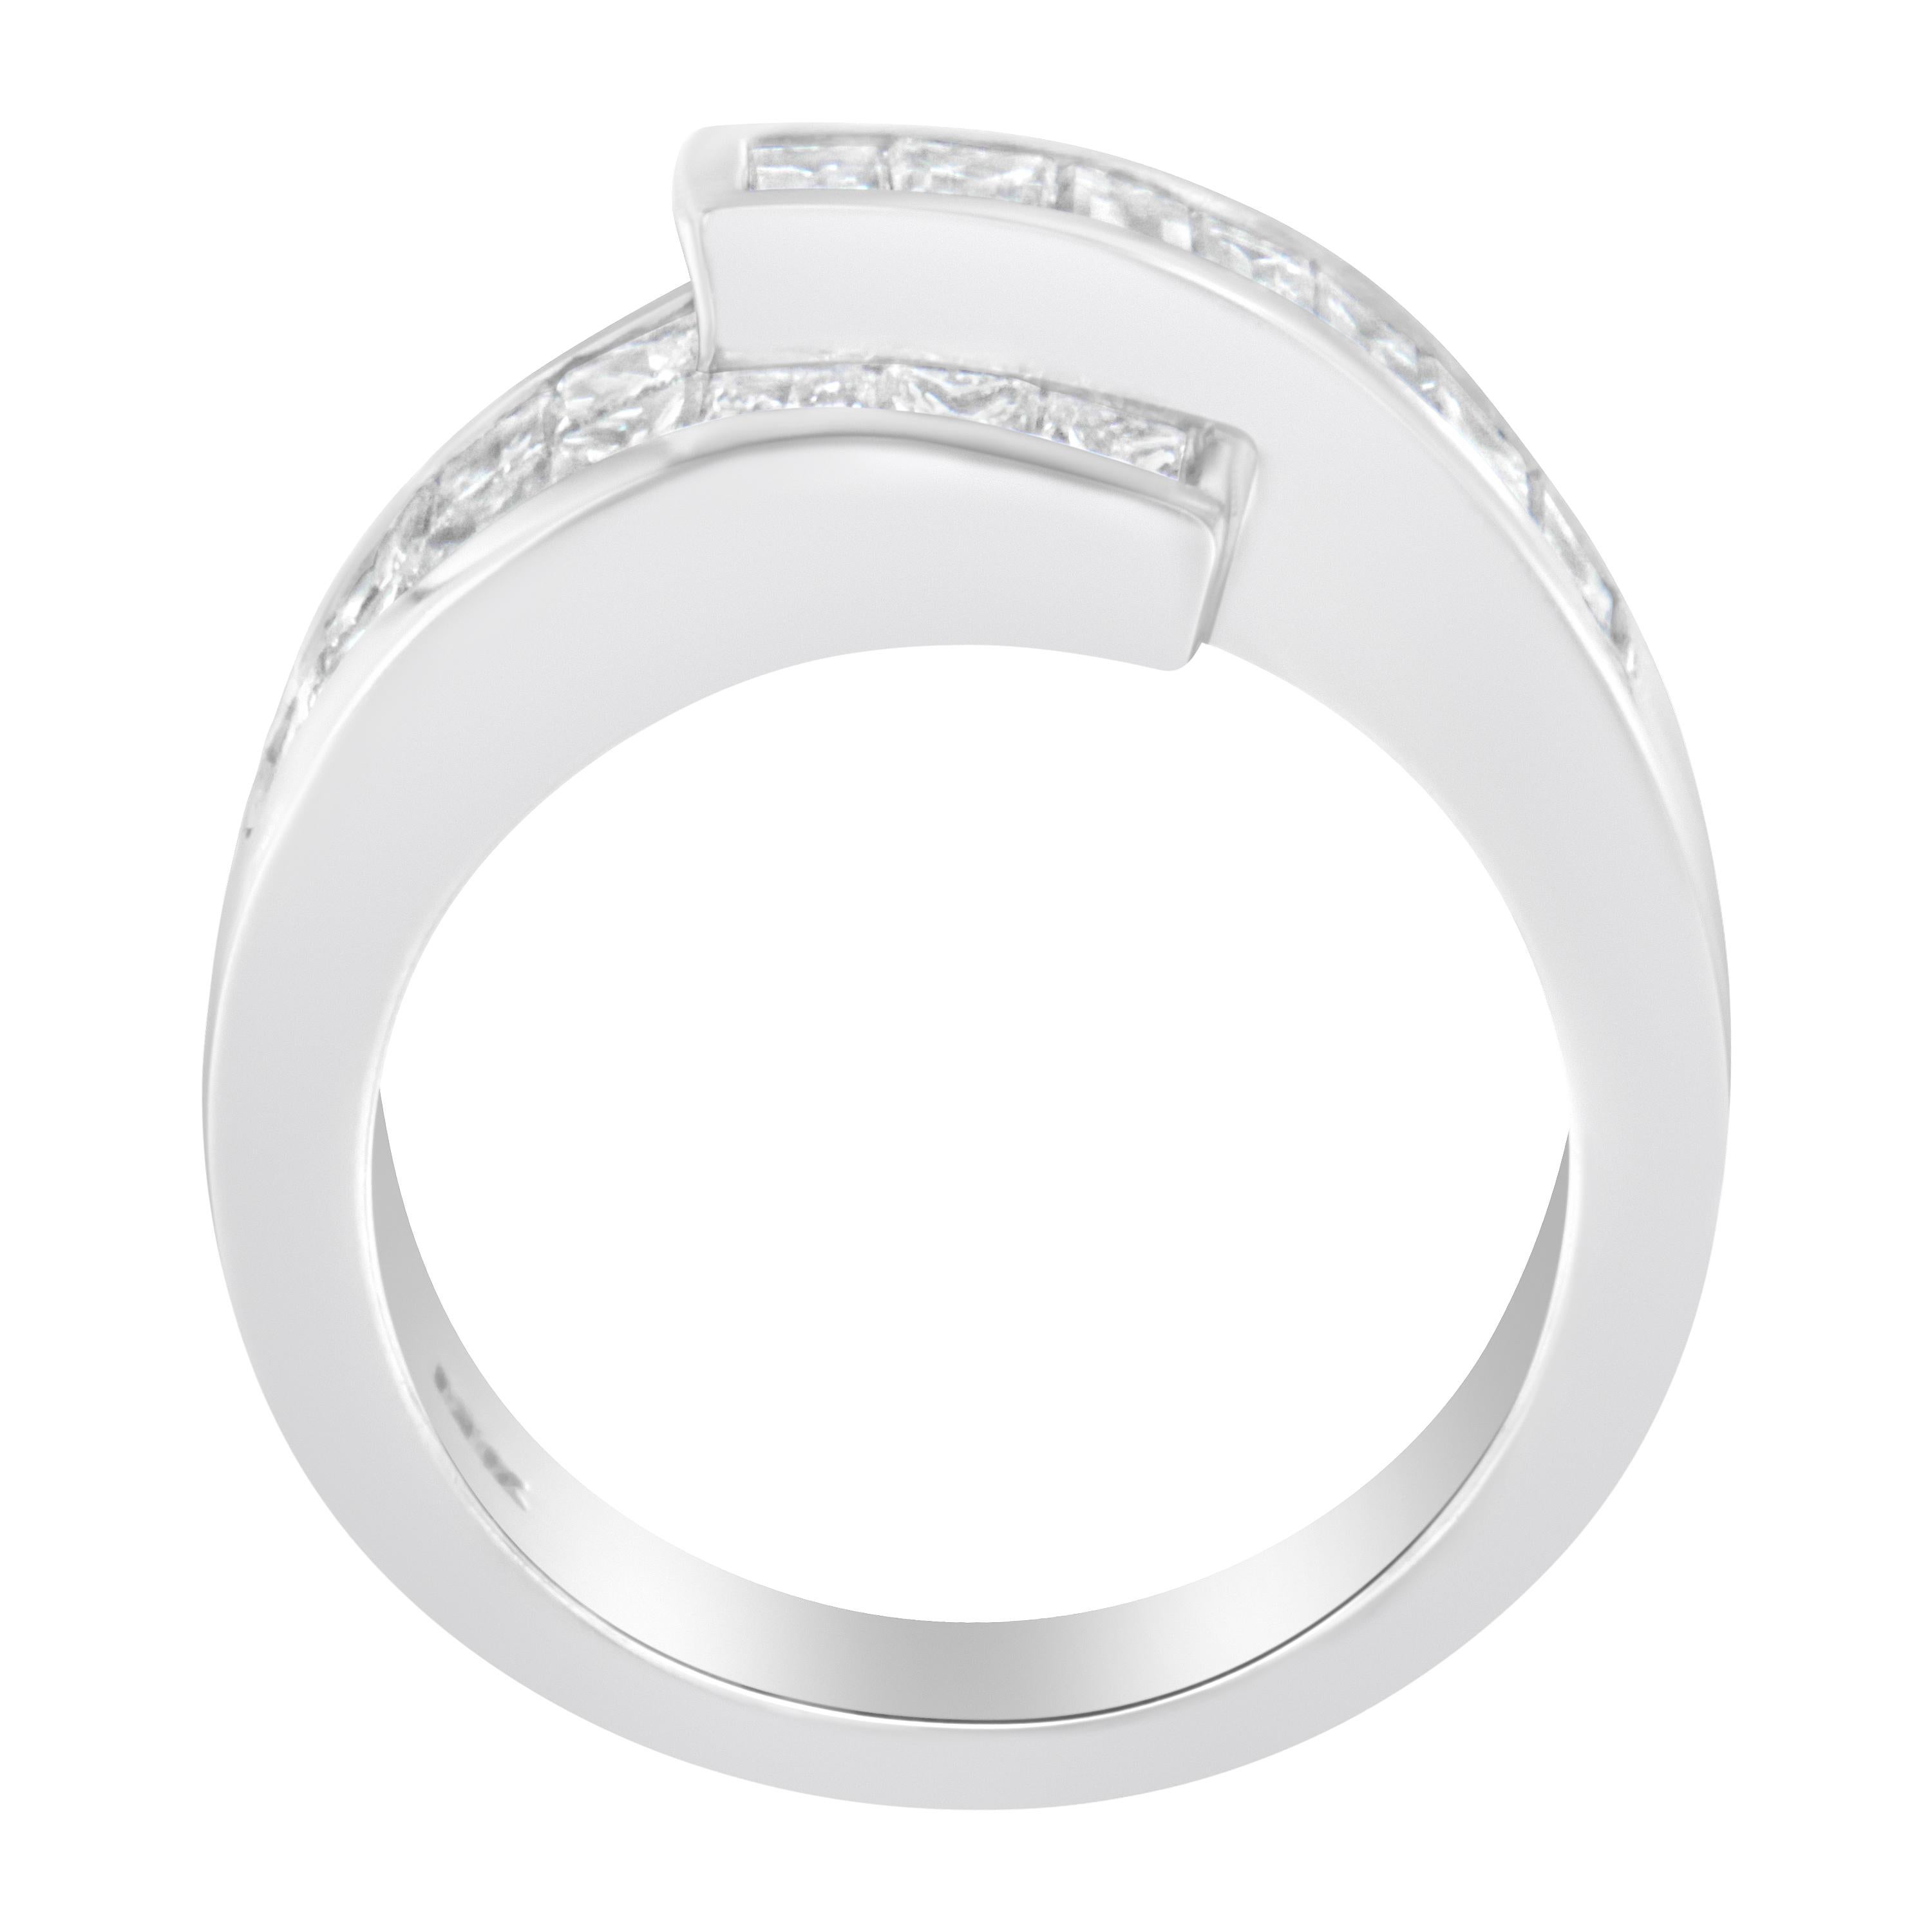 Contemporary 14K White Gold 2.0 Carat Diamond Bypass Ring Band For Sale